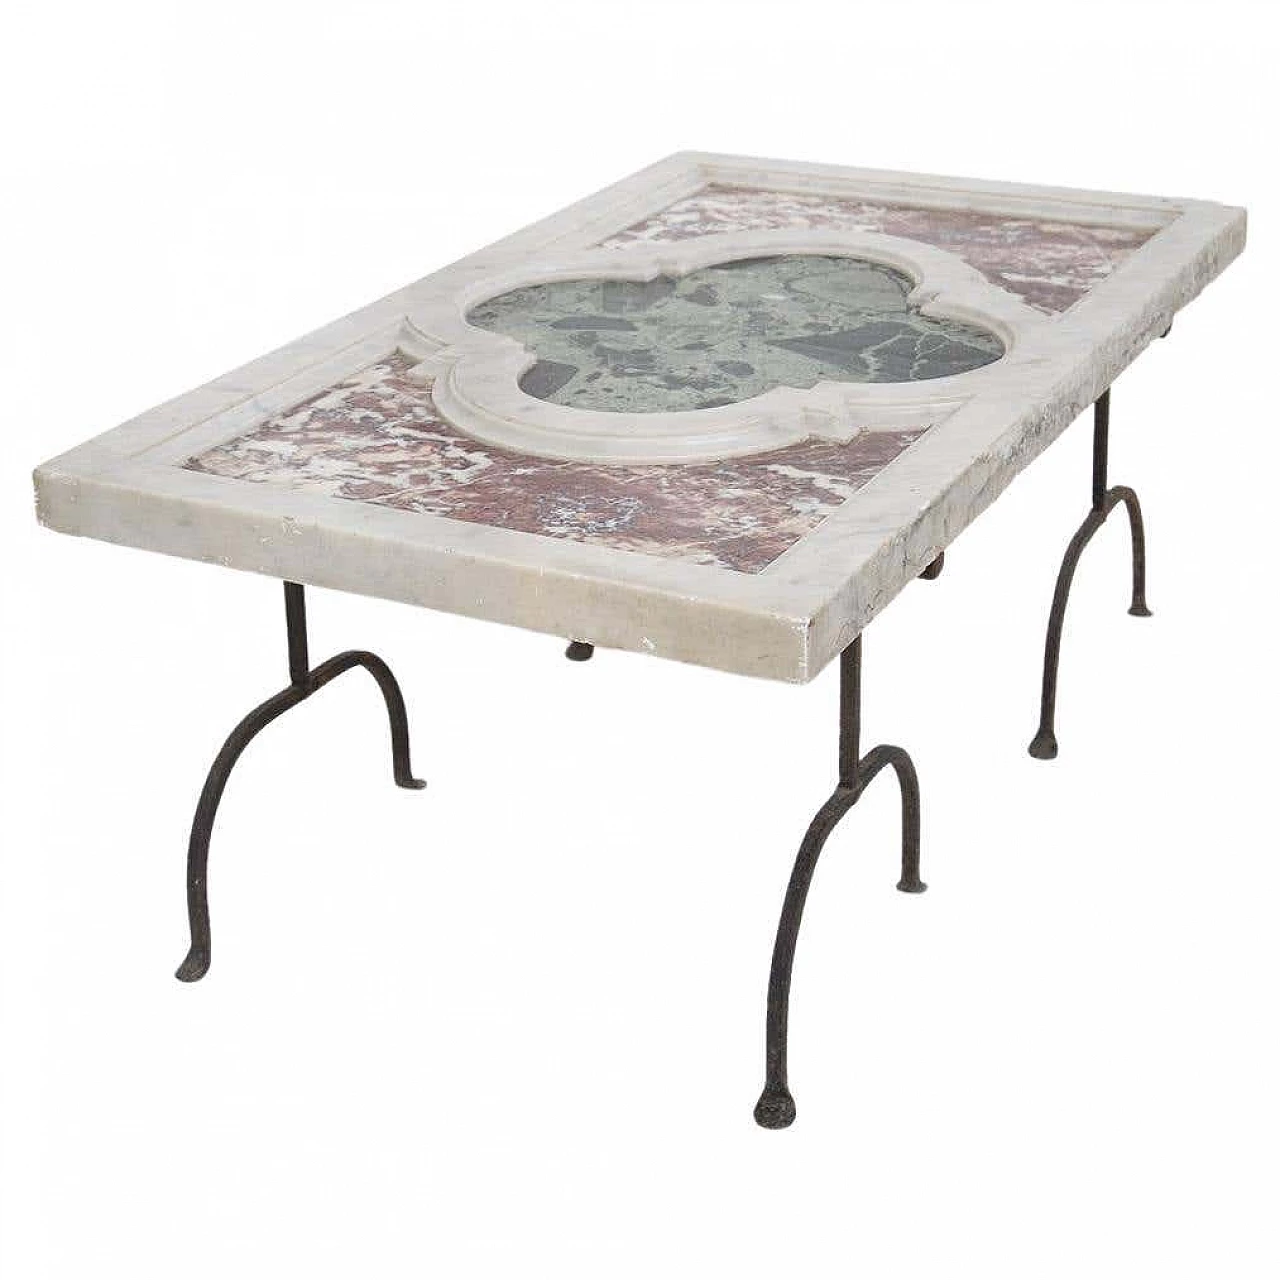 Table with iron base and top in various marbles, 17th century 9